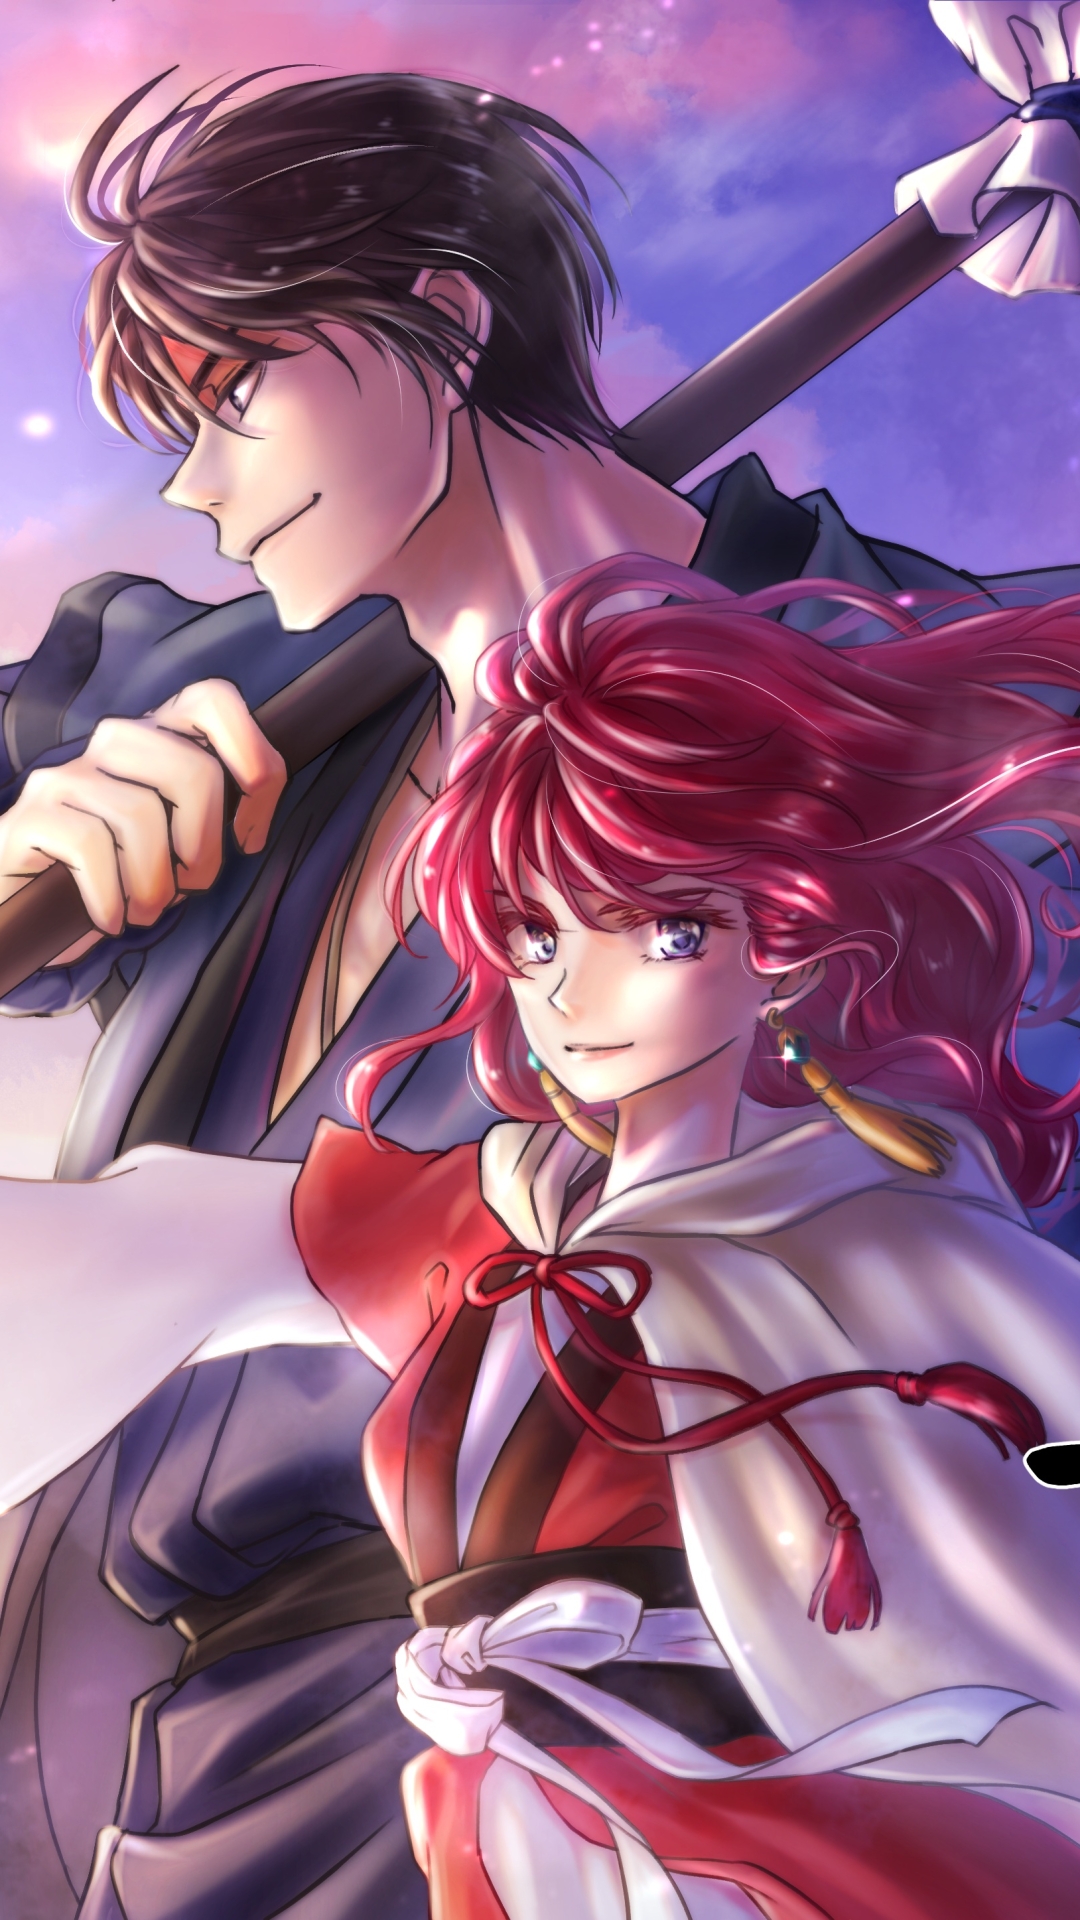 Hak Son & Yona by CaO - Mobile Abyss